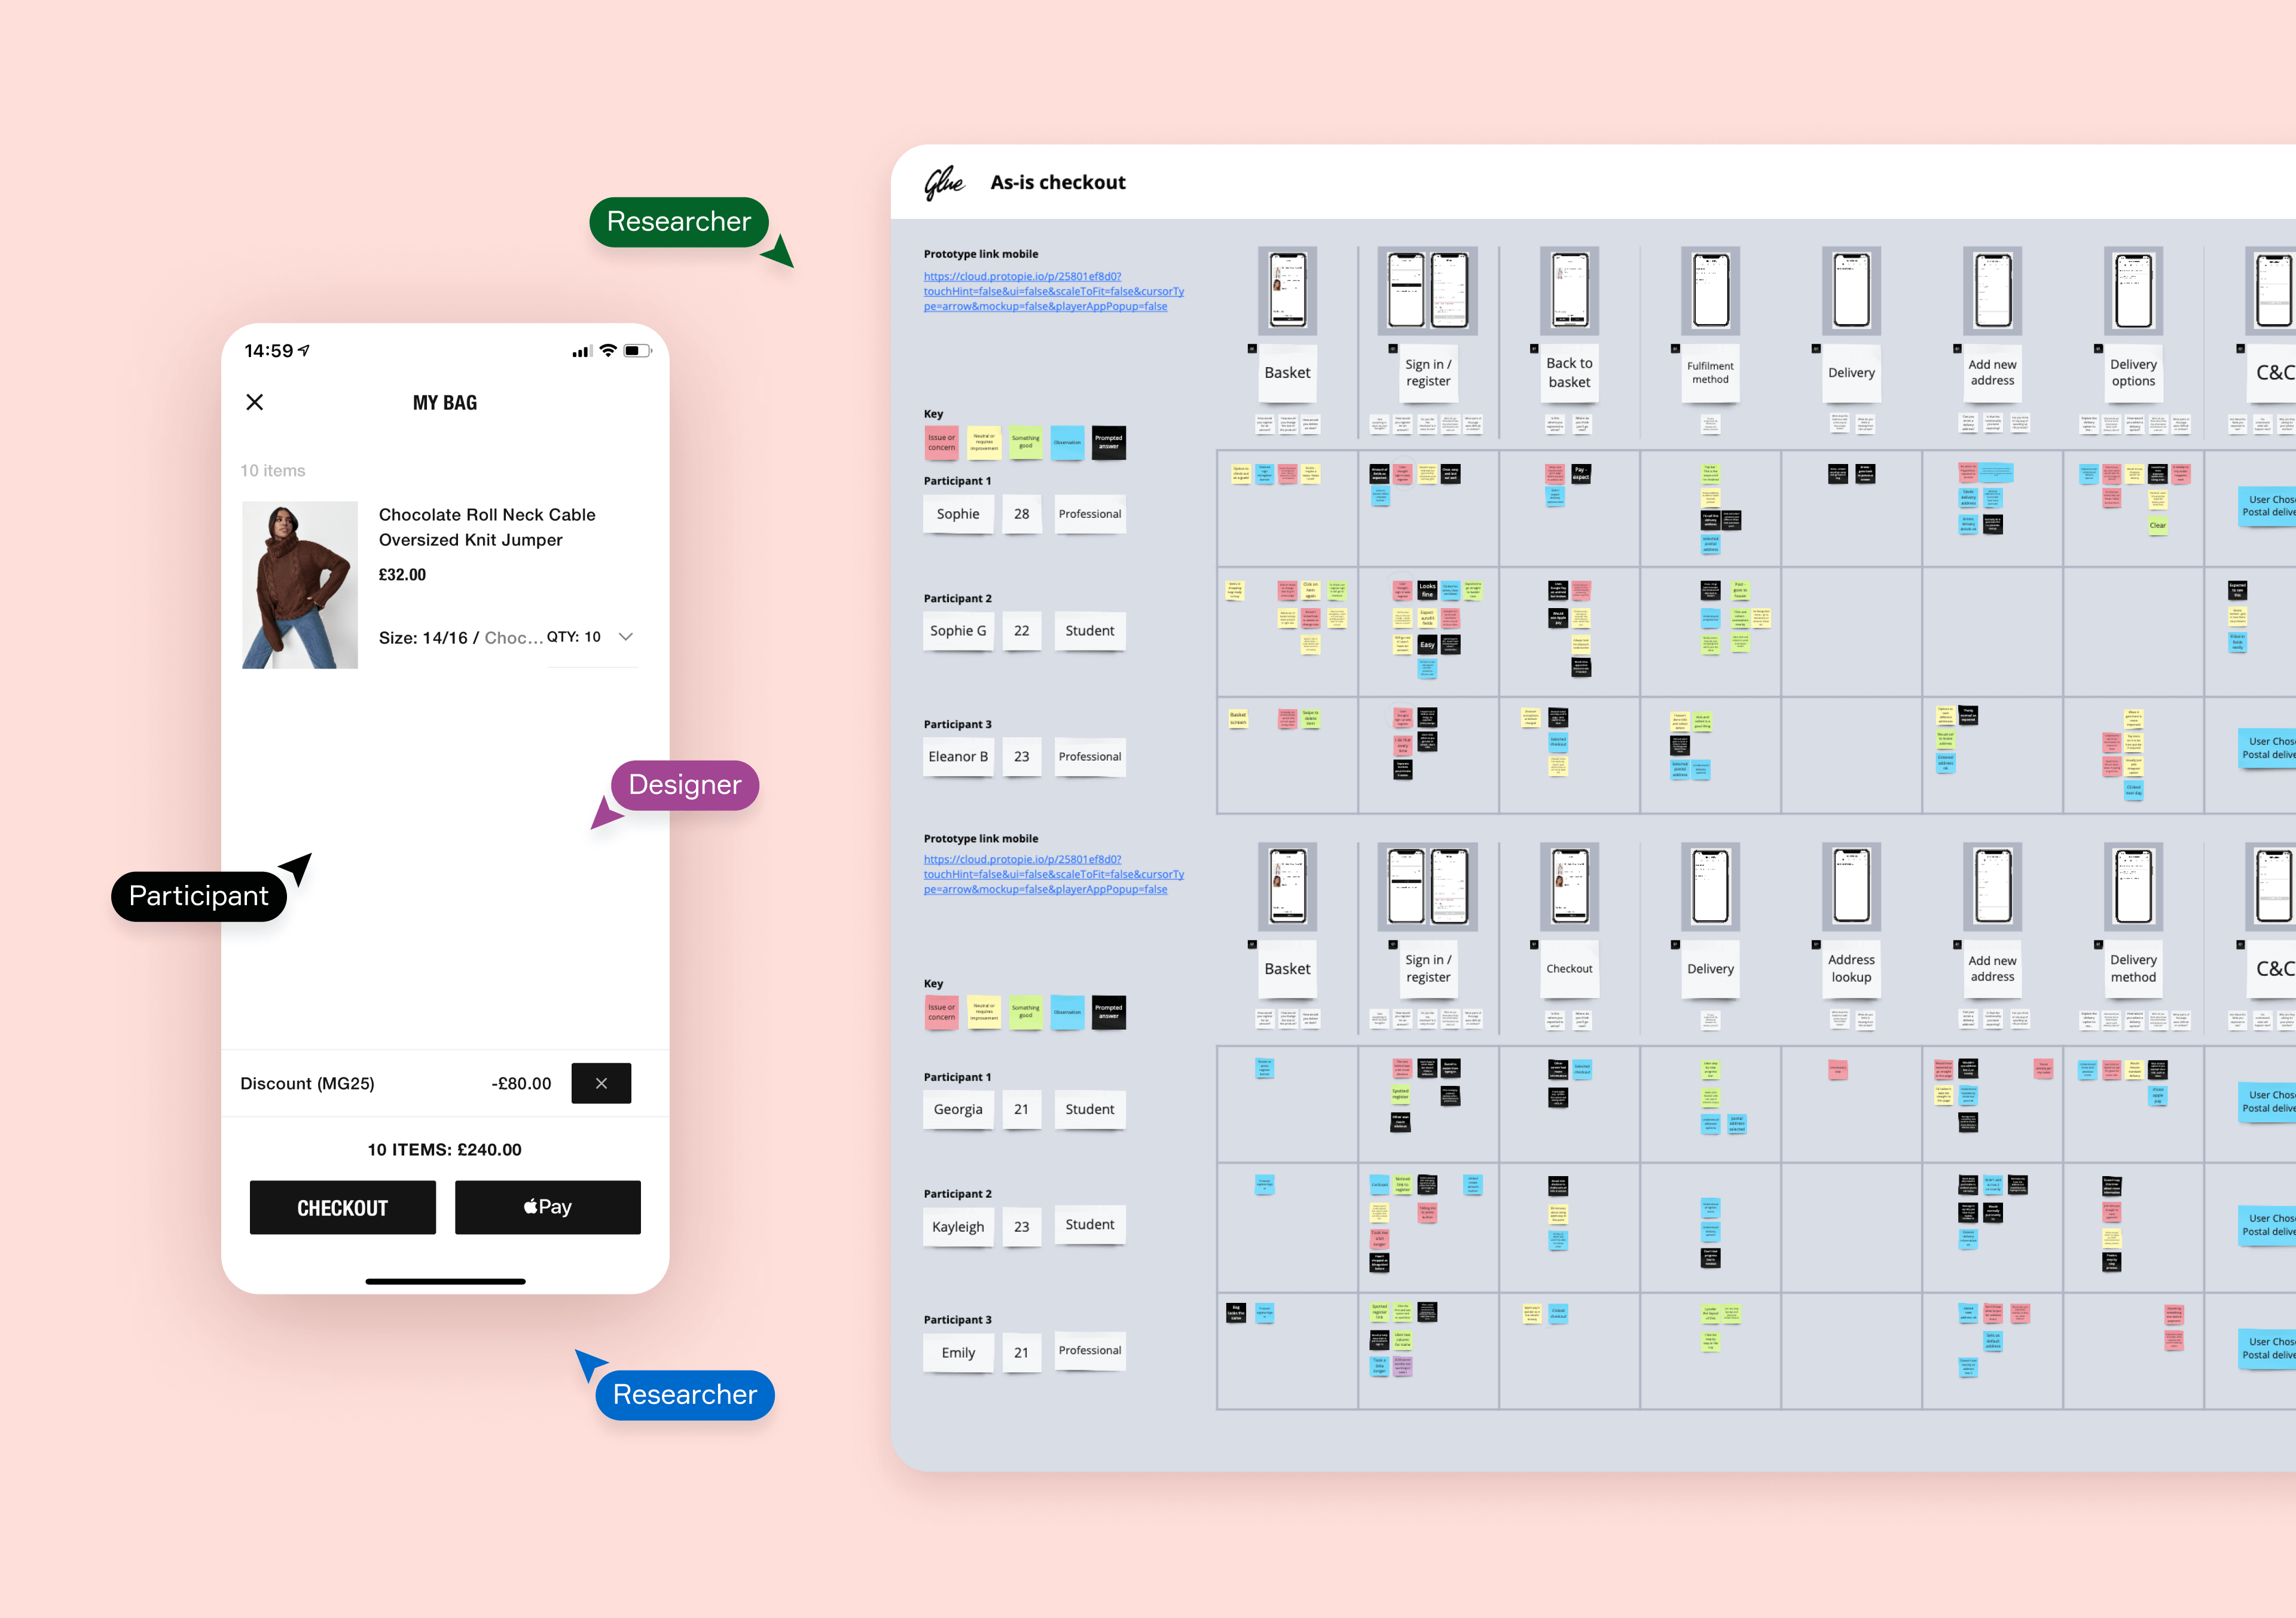 Usability test board for Missguided's existing mobile app checkout